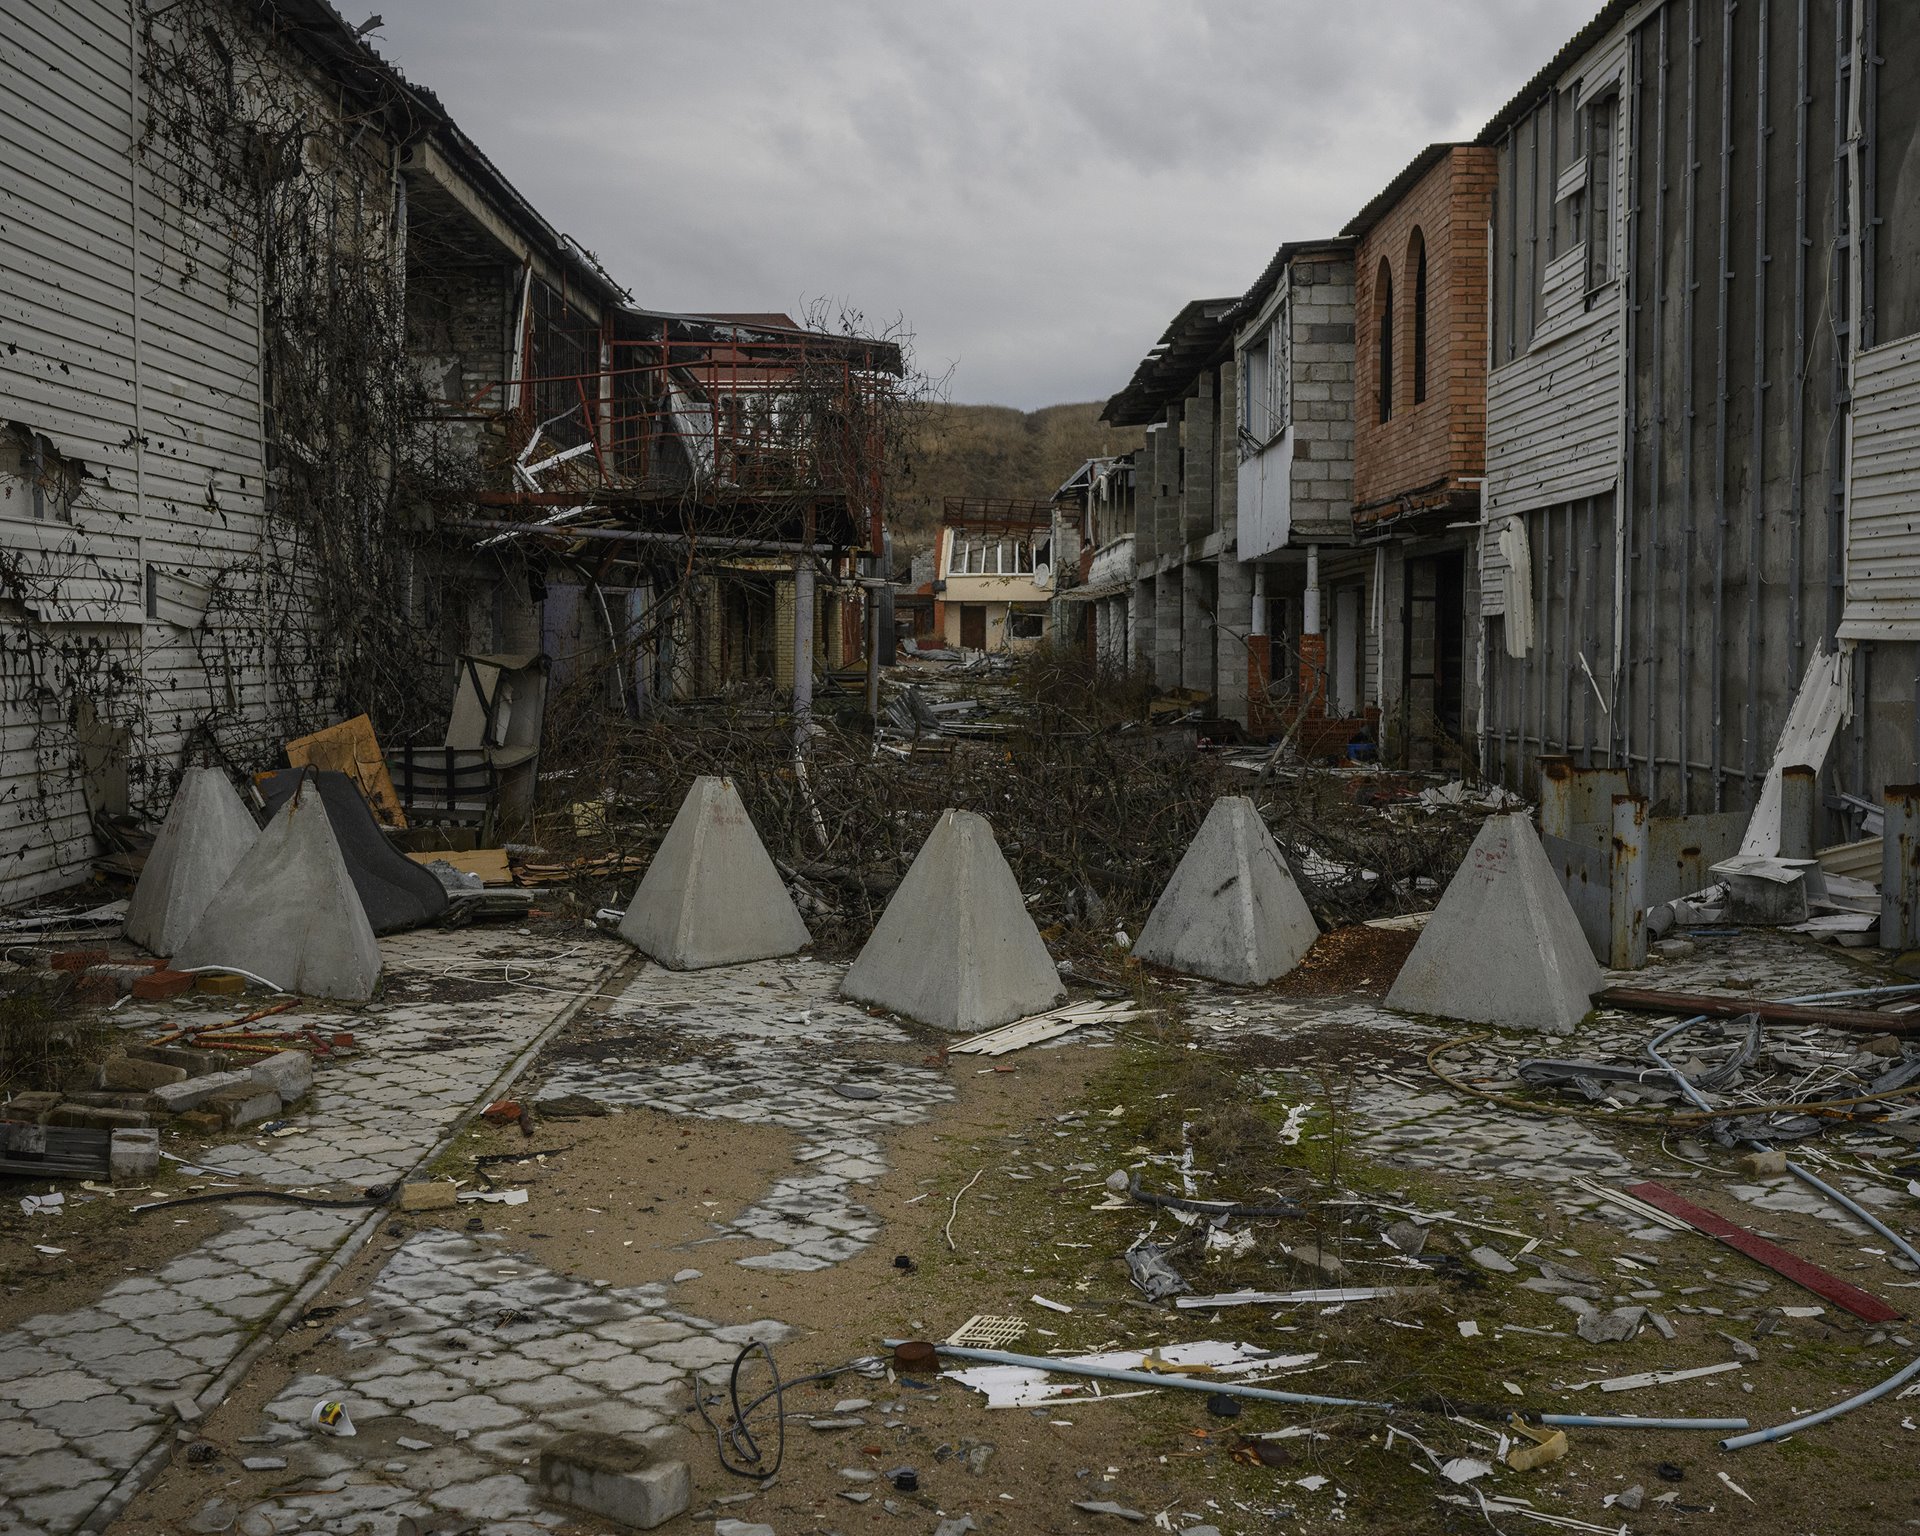 Fortification bollards lie across a street in Shyrokyne, Donetsk, Ukraine. Once a popular holiday resort on the Sea of Azov, Shyrokyne became a battleground in the 2014&ndash;2015 conflict between separatists and Ukrainian forces.